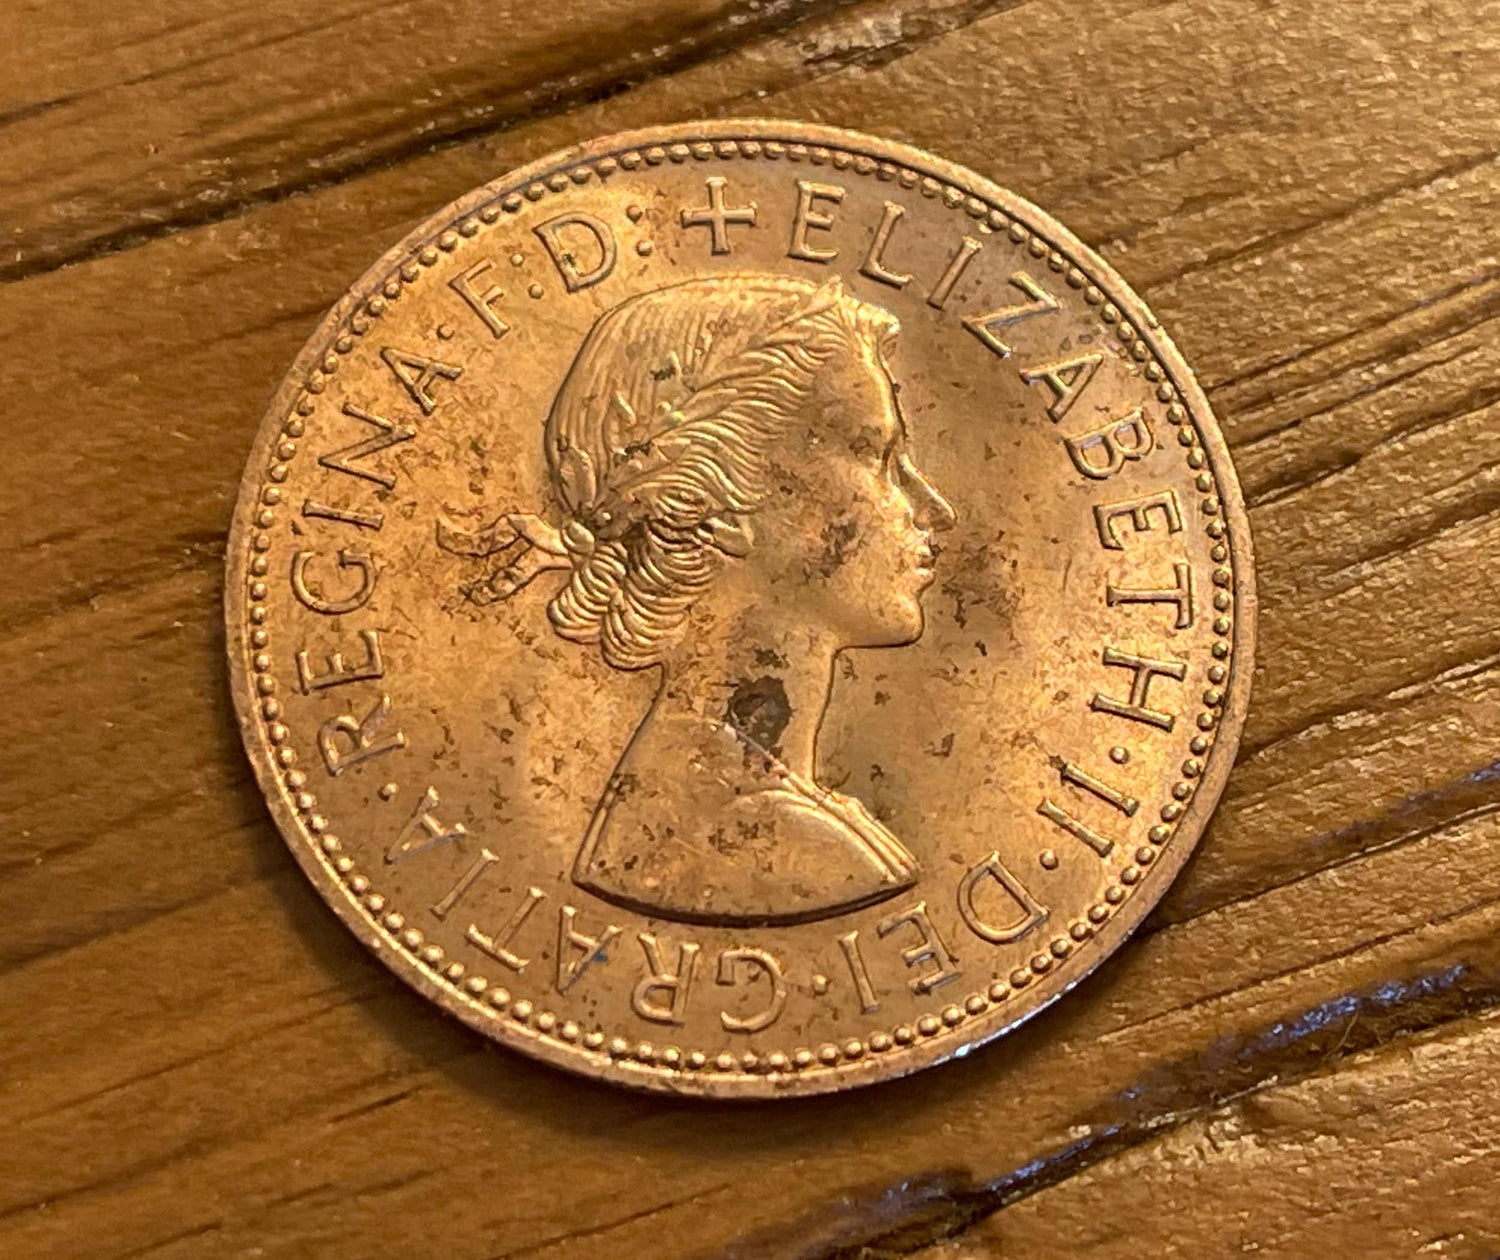 Queen Elizabeth II & Britannia Great Britain 1 Penny Authentic Coin Money for Jewelry and Craft Making